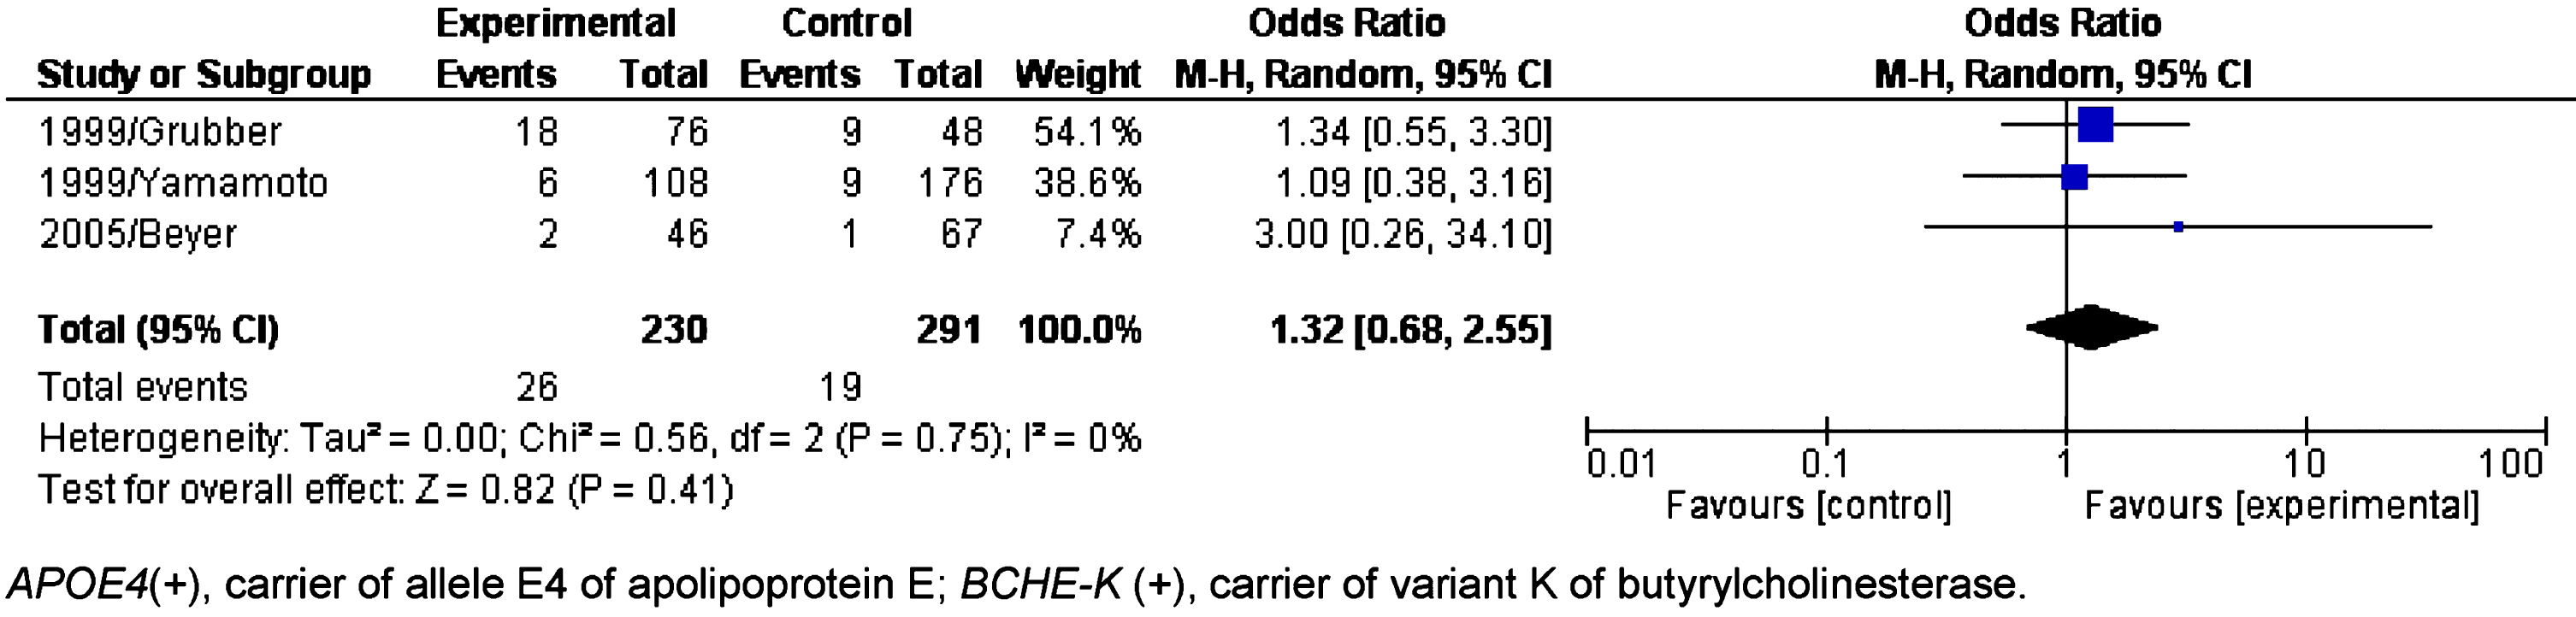 Forest plot of the comparison between people APOE4(+)/BCHE-K(+) with Alzheimer’s disease and control in the population younger than 65 years old.